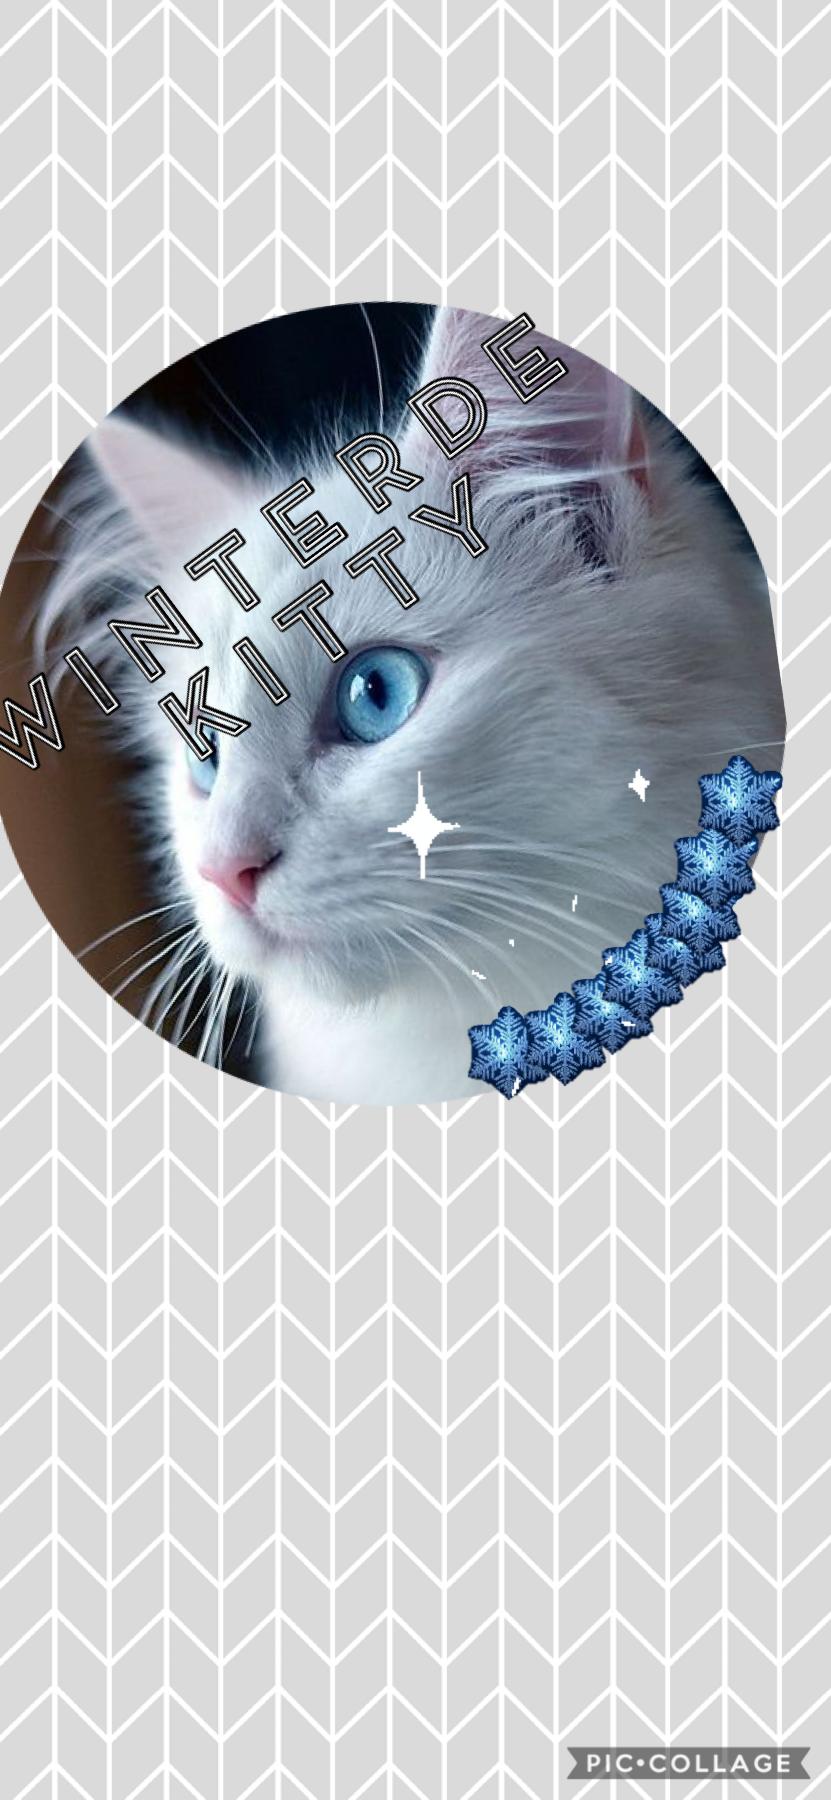 Shout out to Winterdekitty and this is my icon entry!